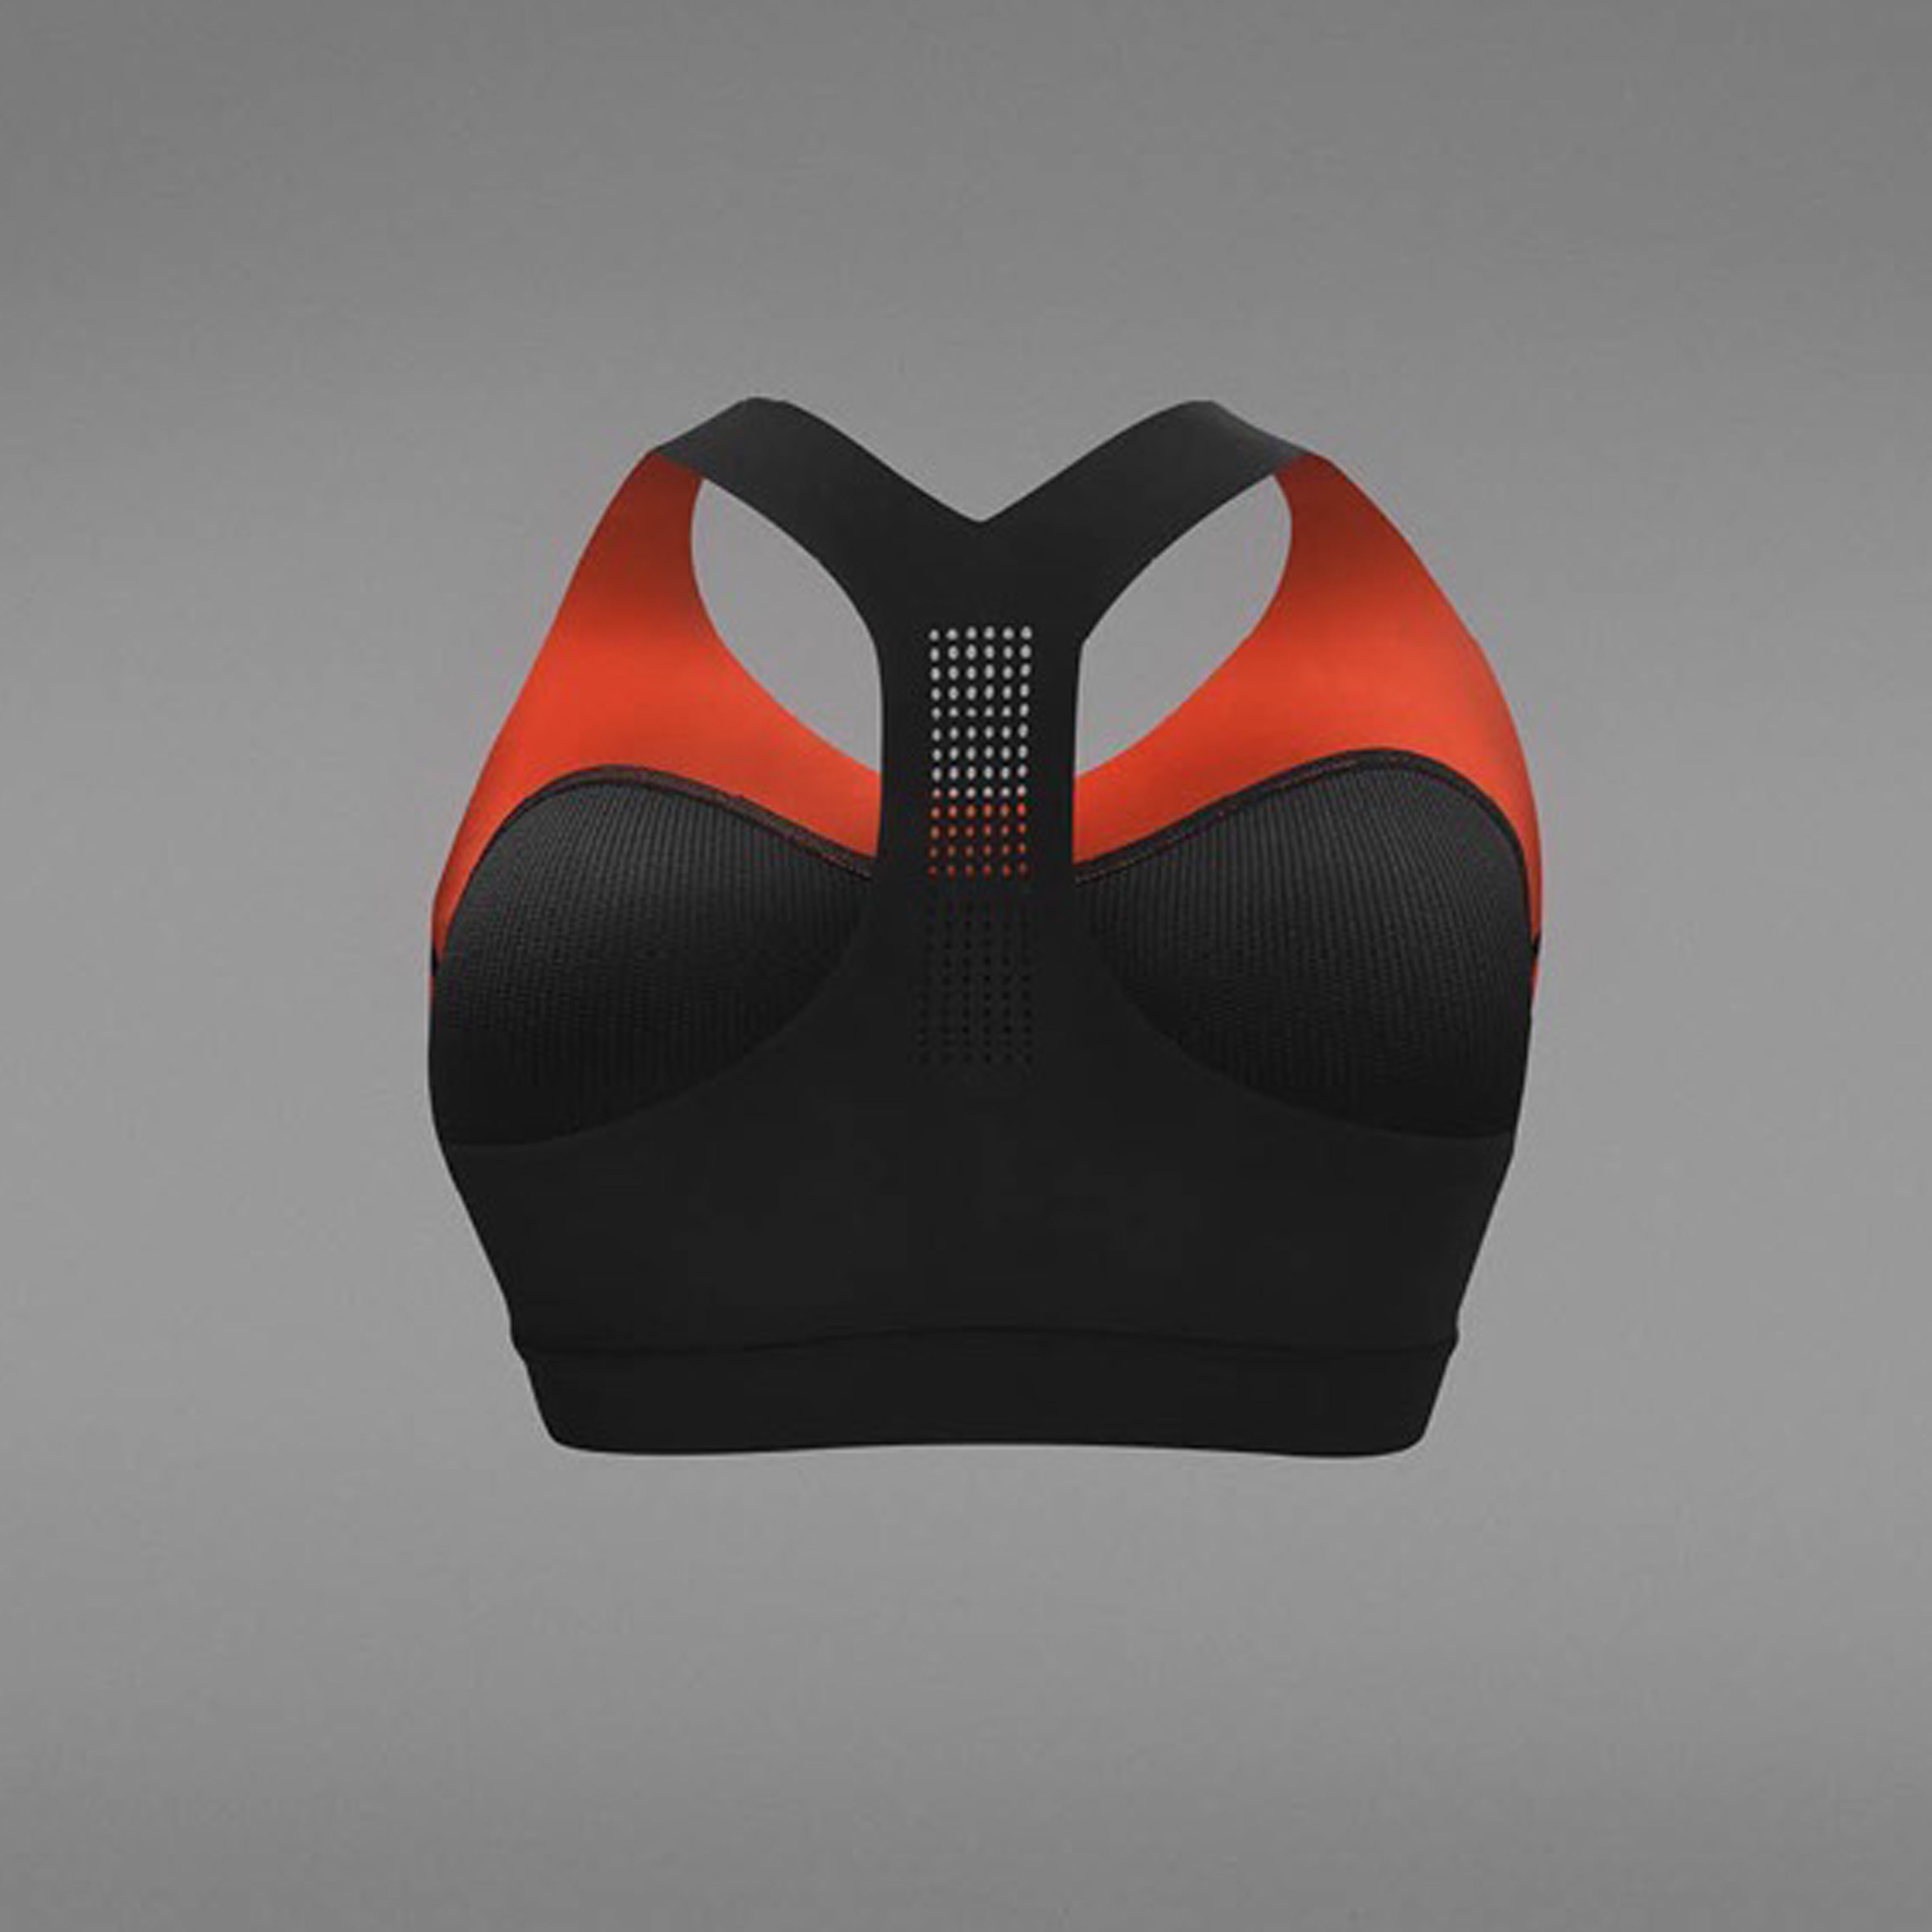 Reebok's gel-infused PureMove bra firms up movement